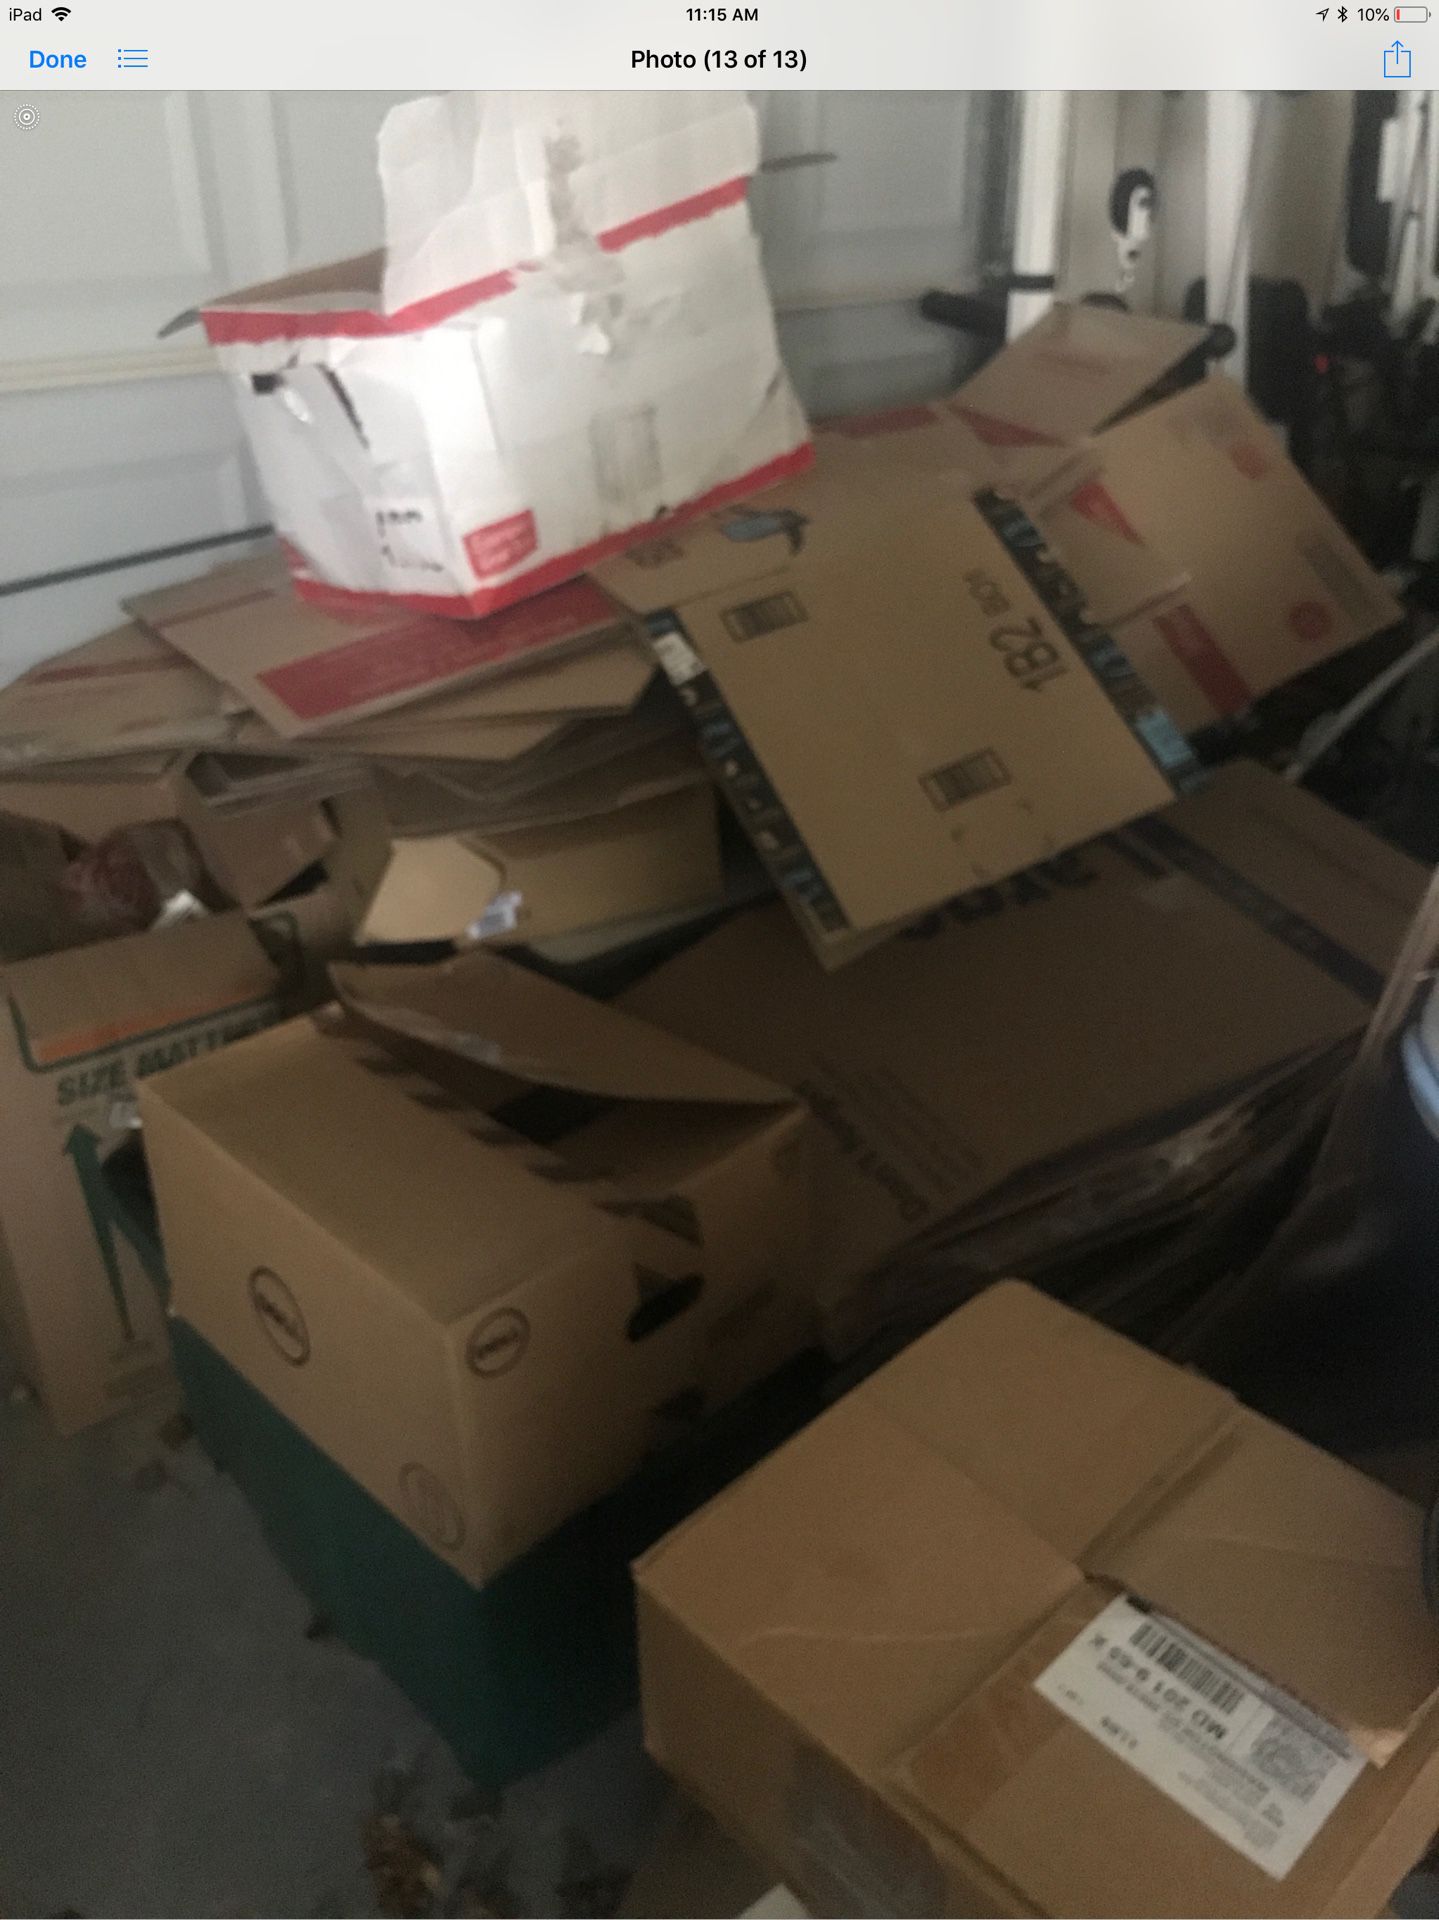 FREE moving boxes and packing paper Laurel/Columbia MD